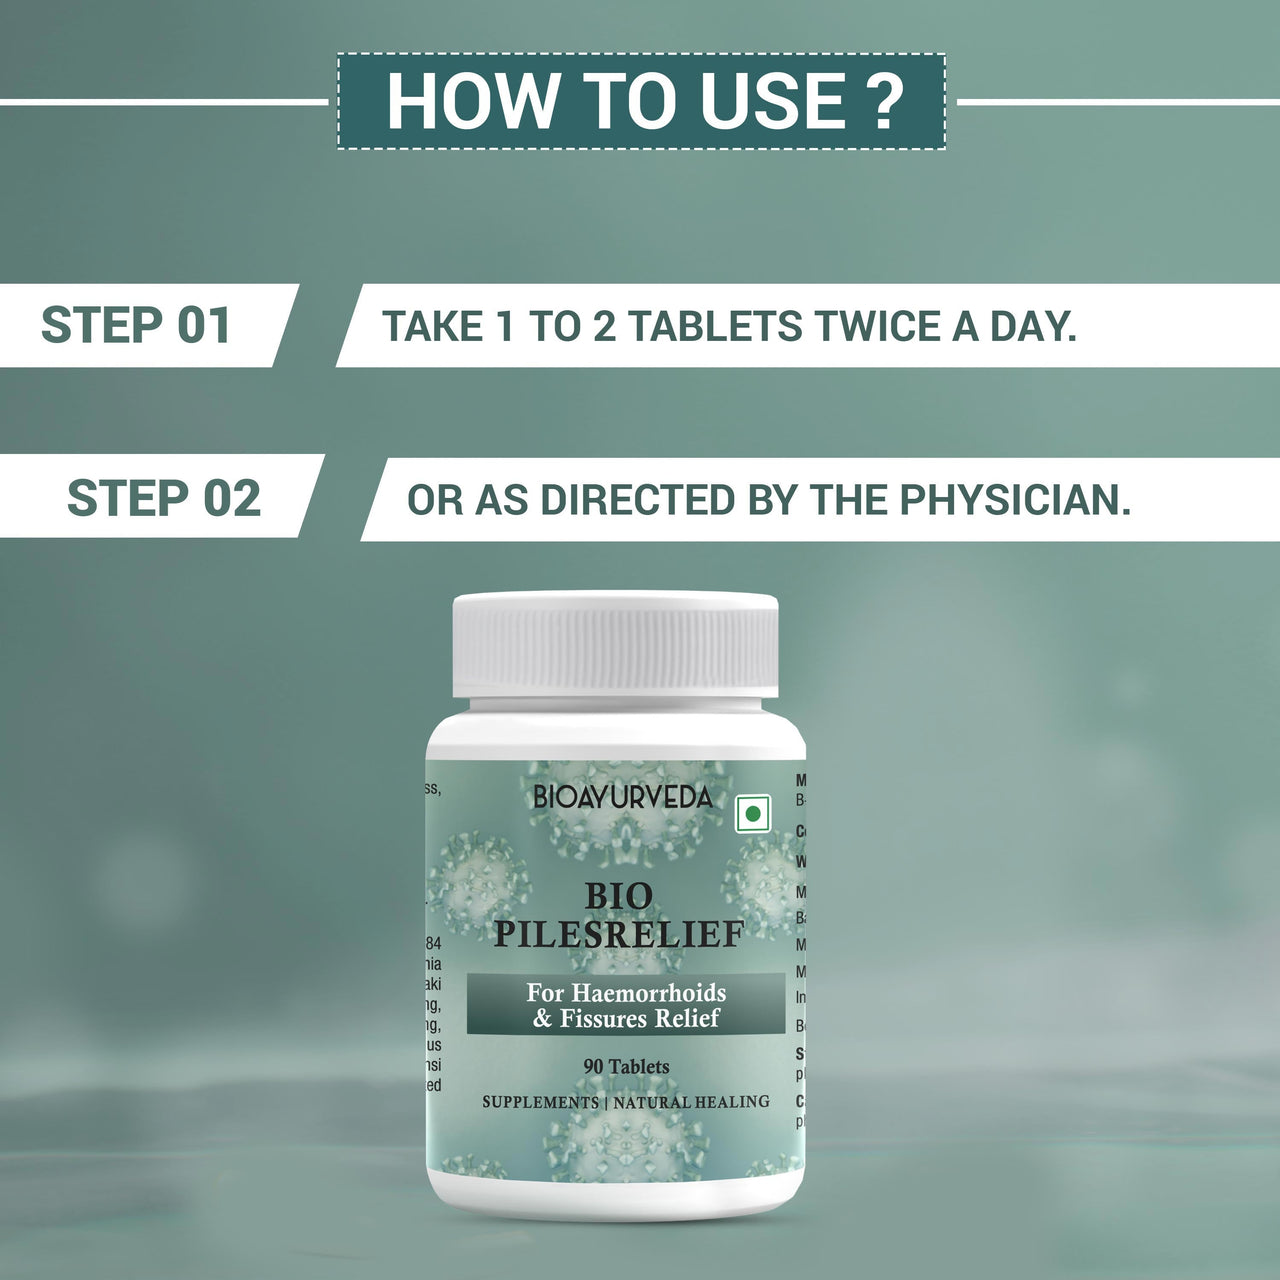 How to use Pilesrelief Tablet